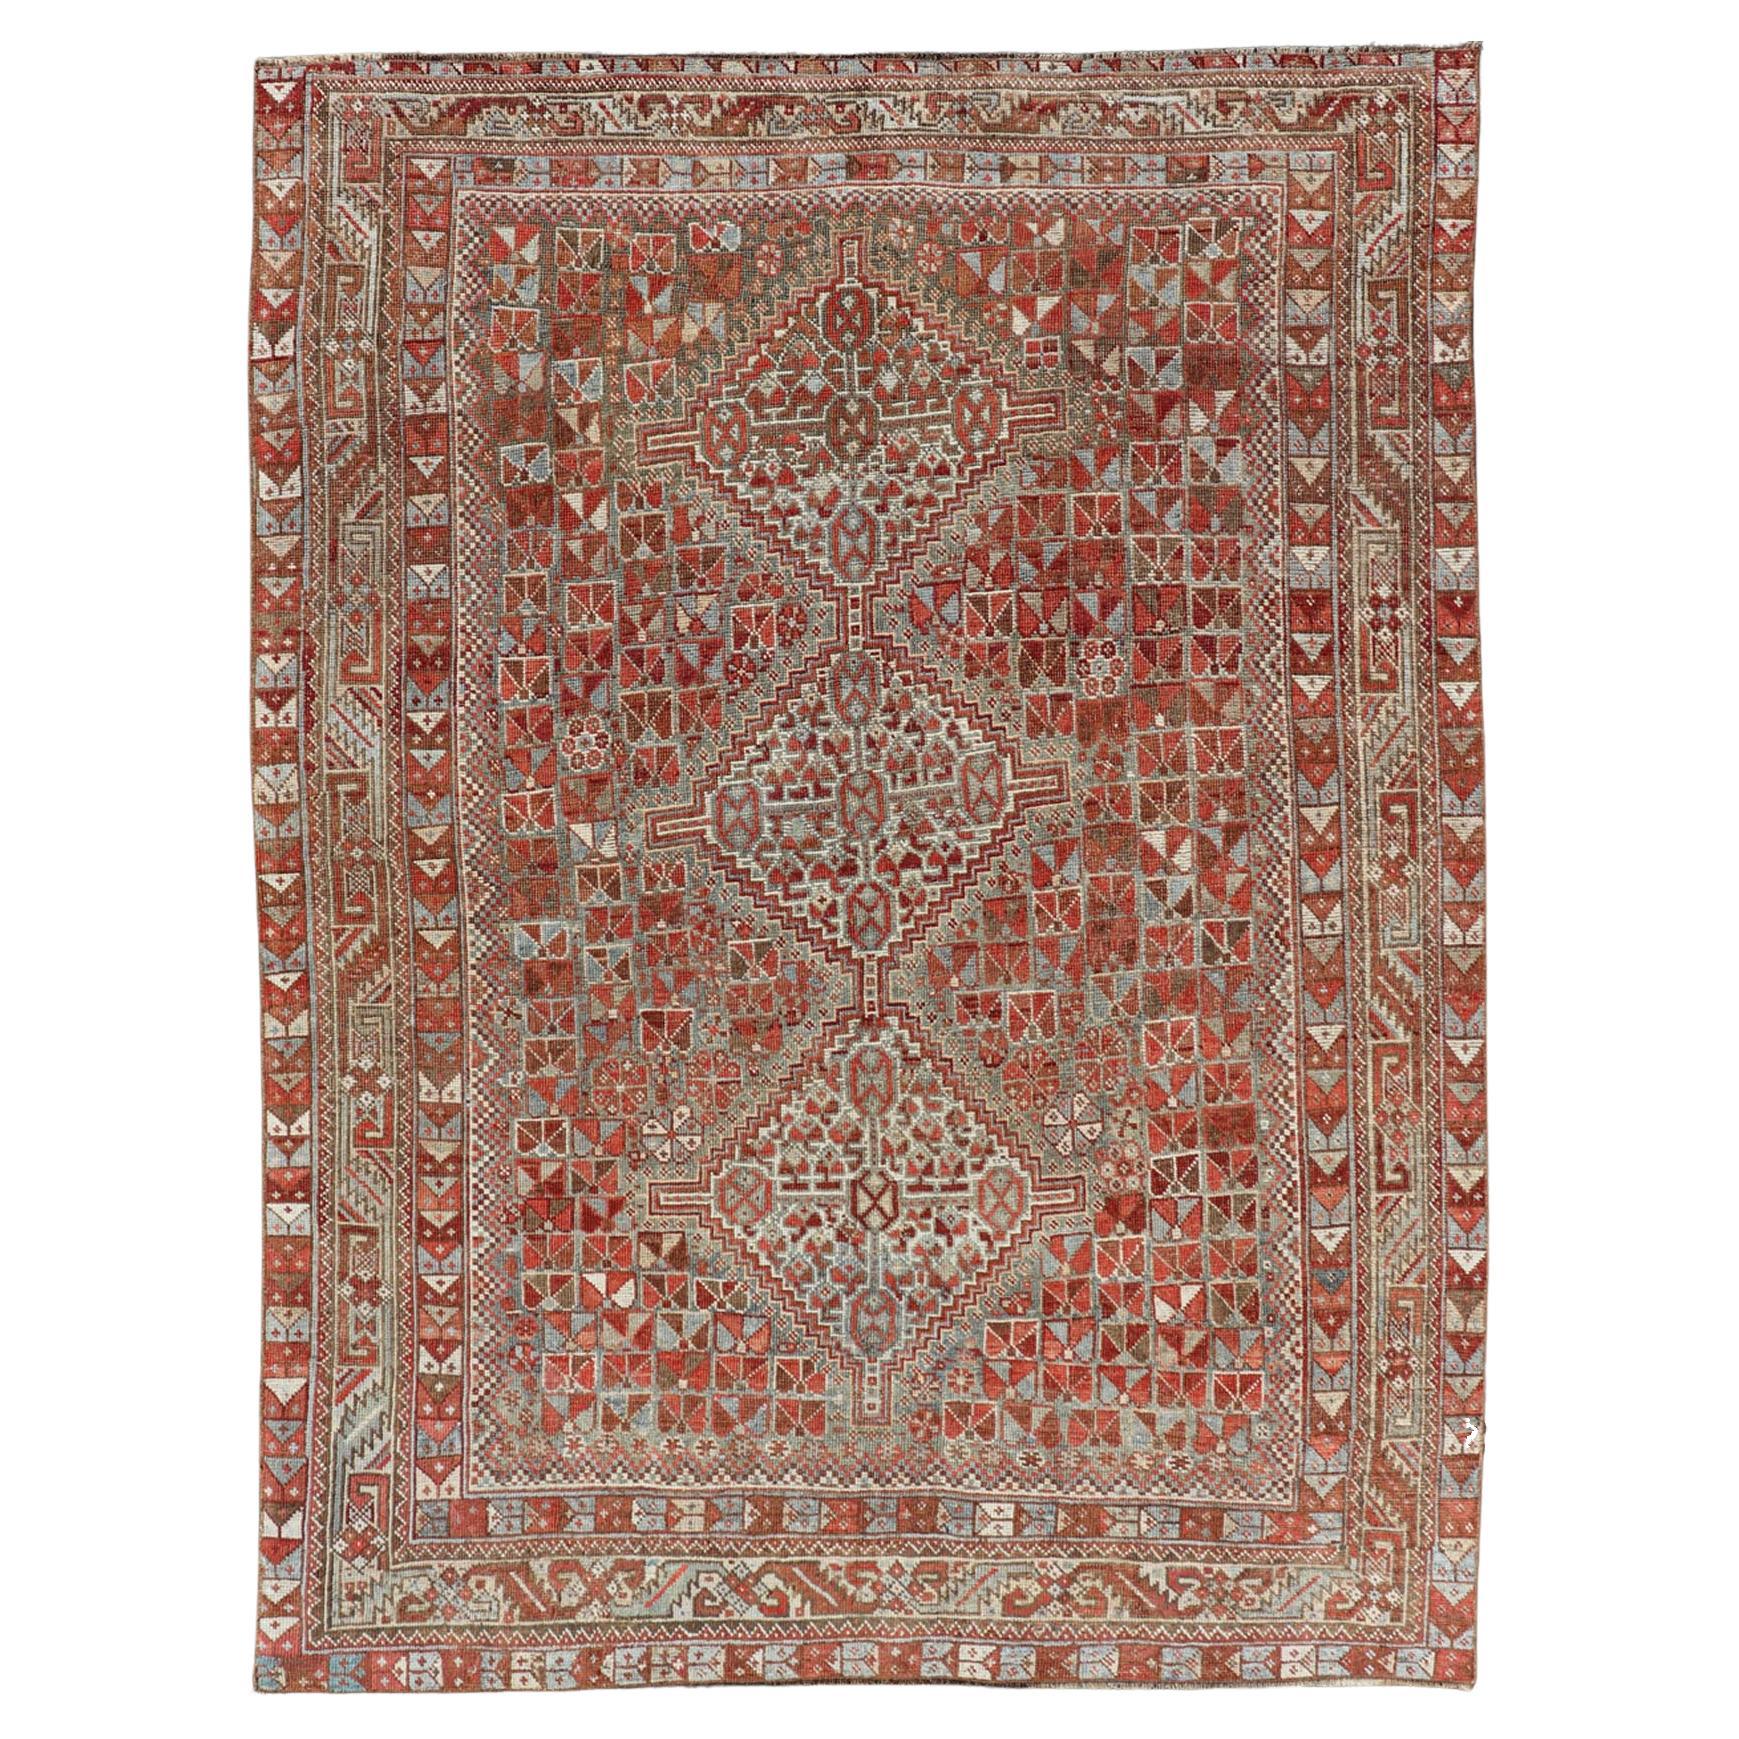 Antique Distressed Persian Medallion Shiraz Rug in Shades Rusty Red & Steel Blue